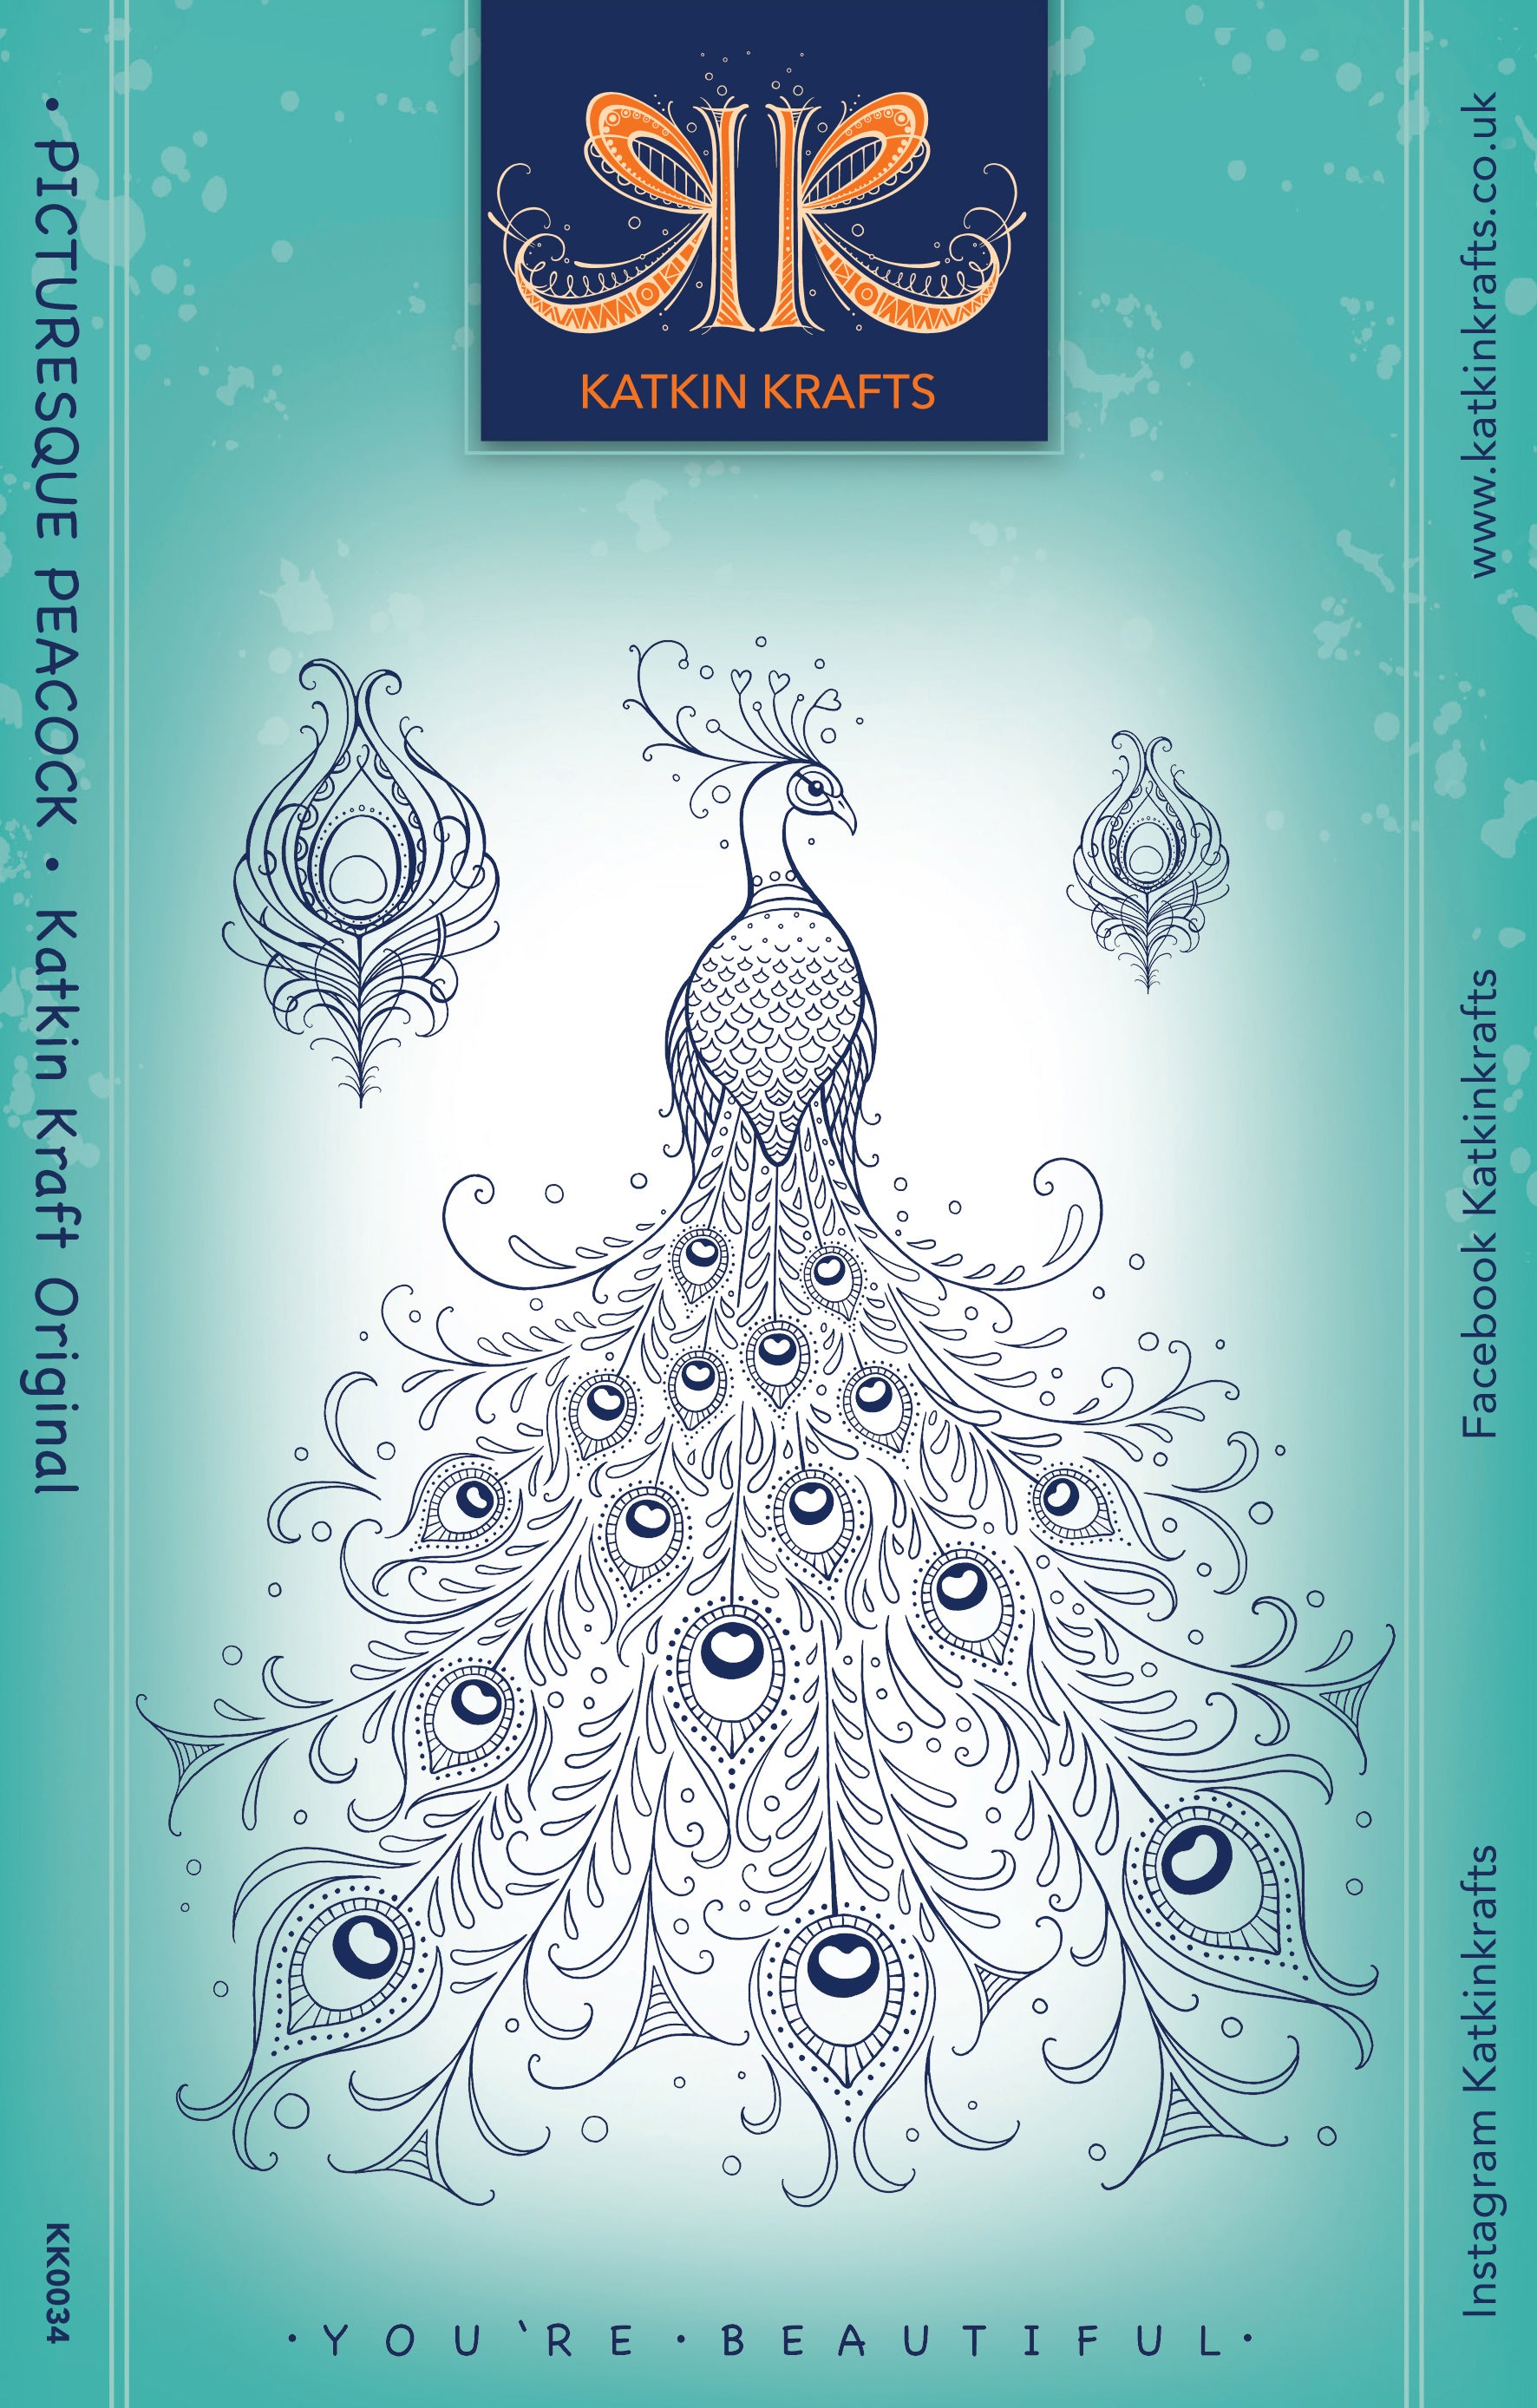 Katkin Krafts Picturesque Peacock 6 in x 8 in Clear Stamp Set